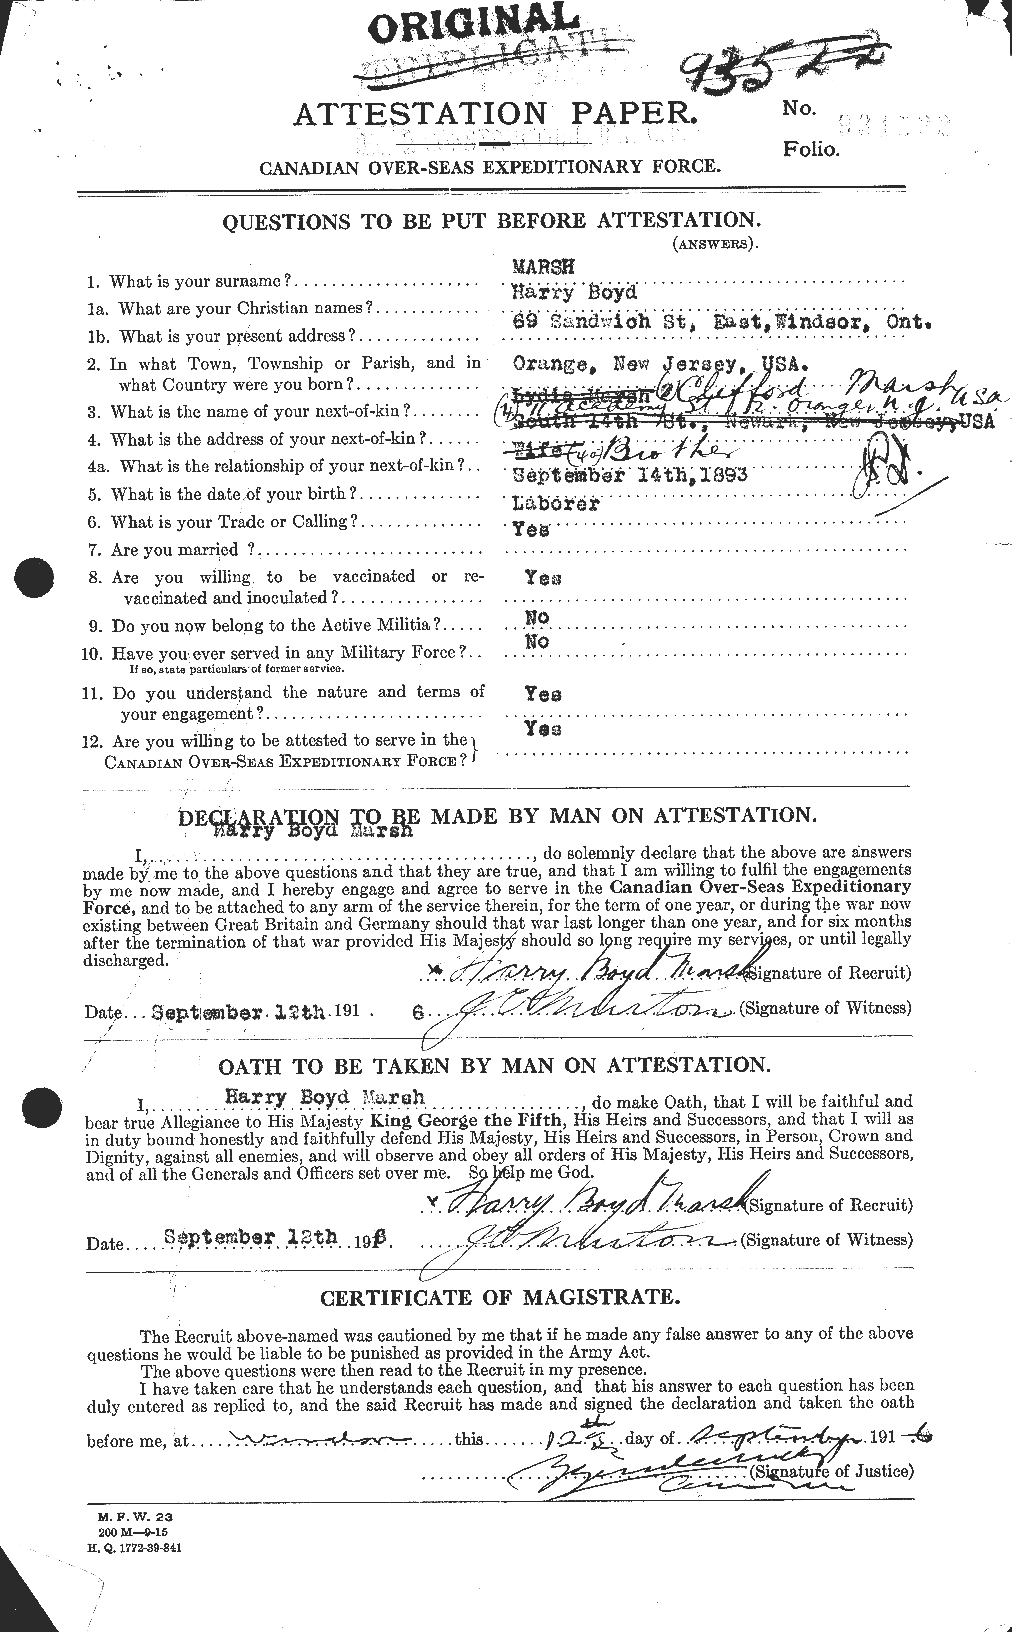 Personnel Records of the First World War - CEF 495542a